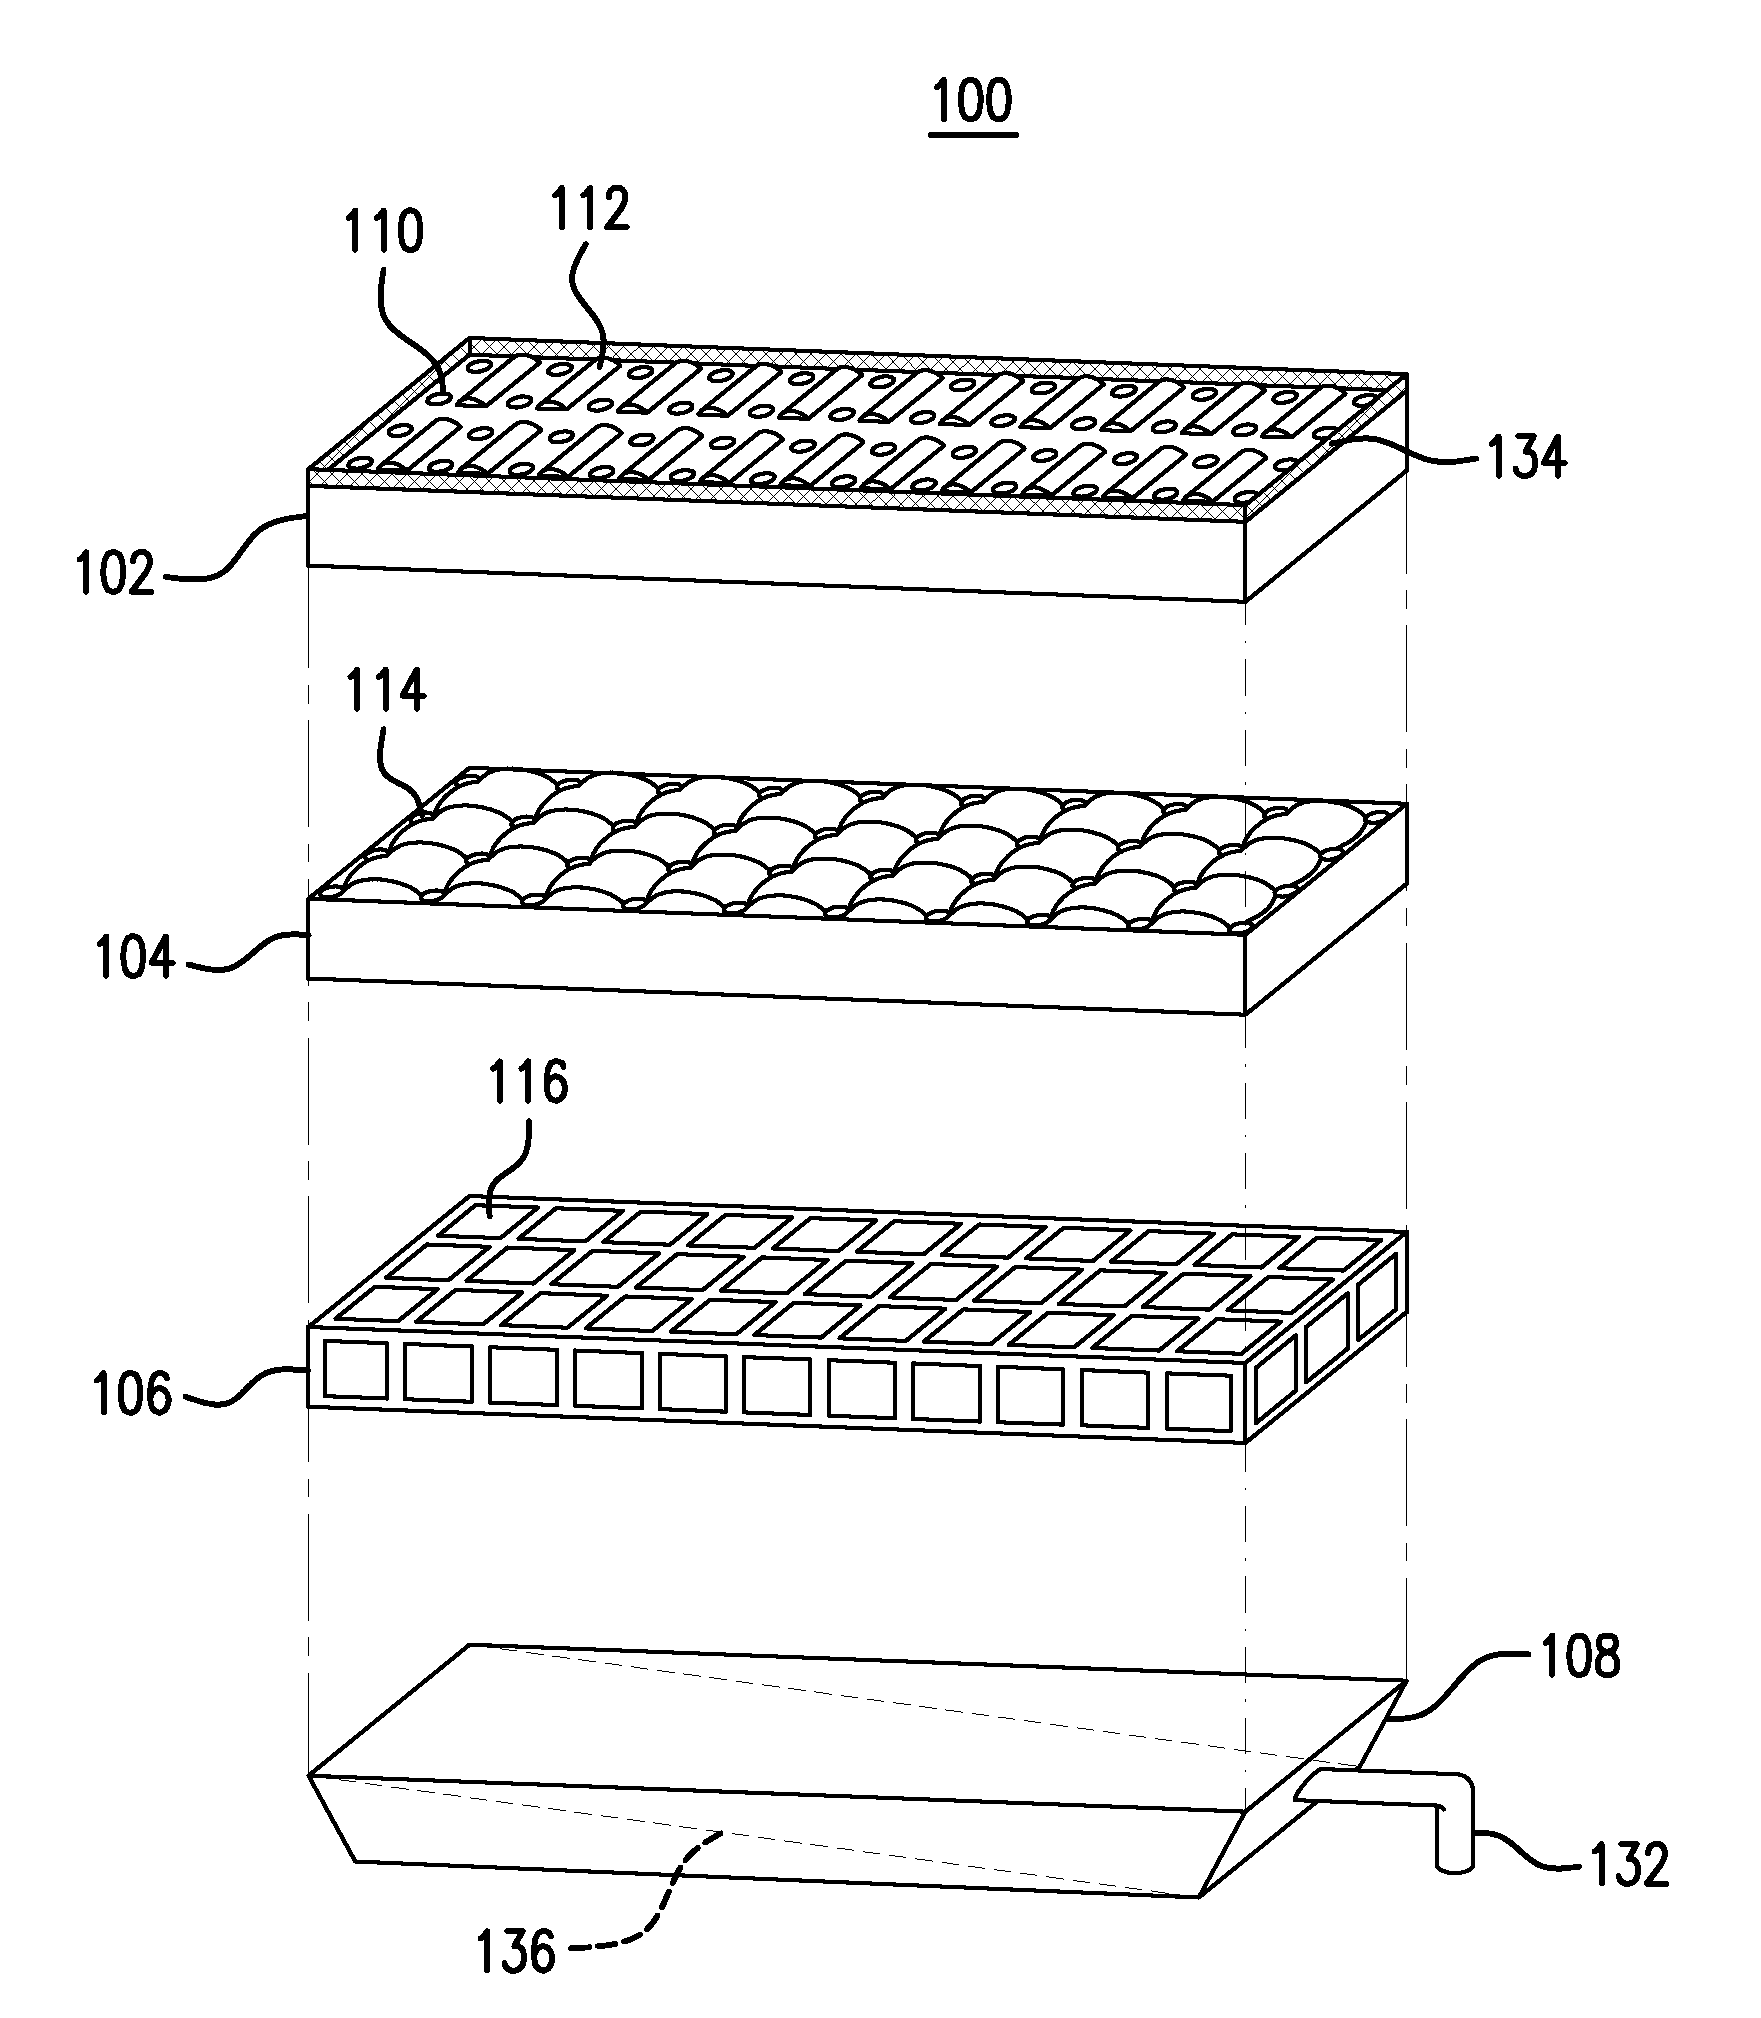 Integral fluid disposal apparatus and system